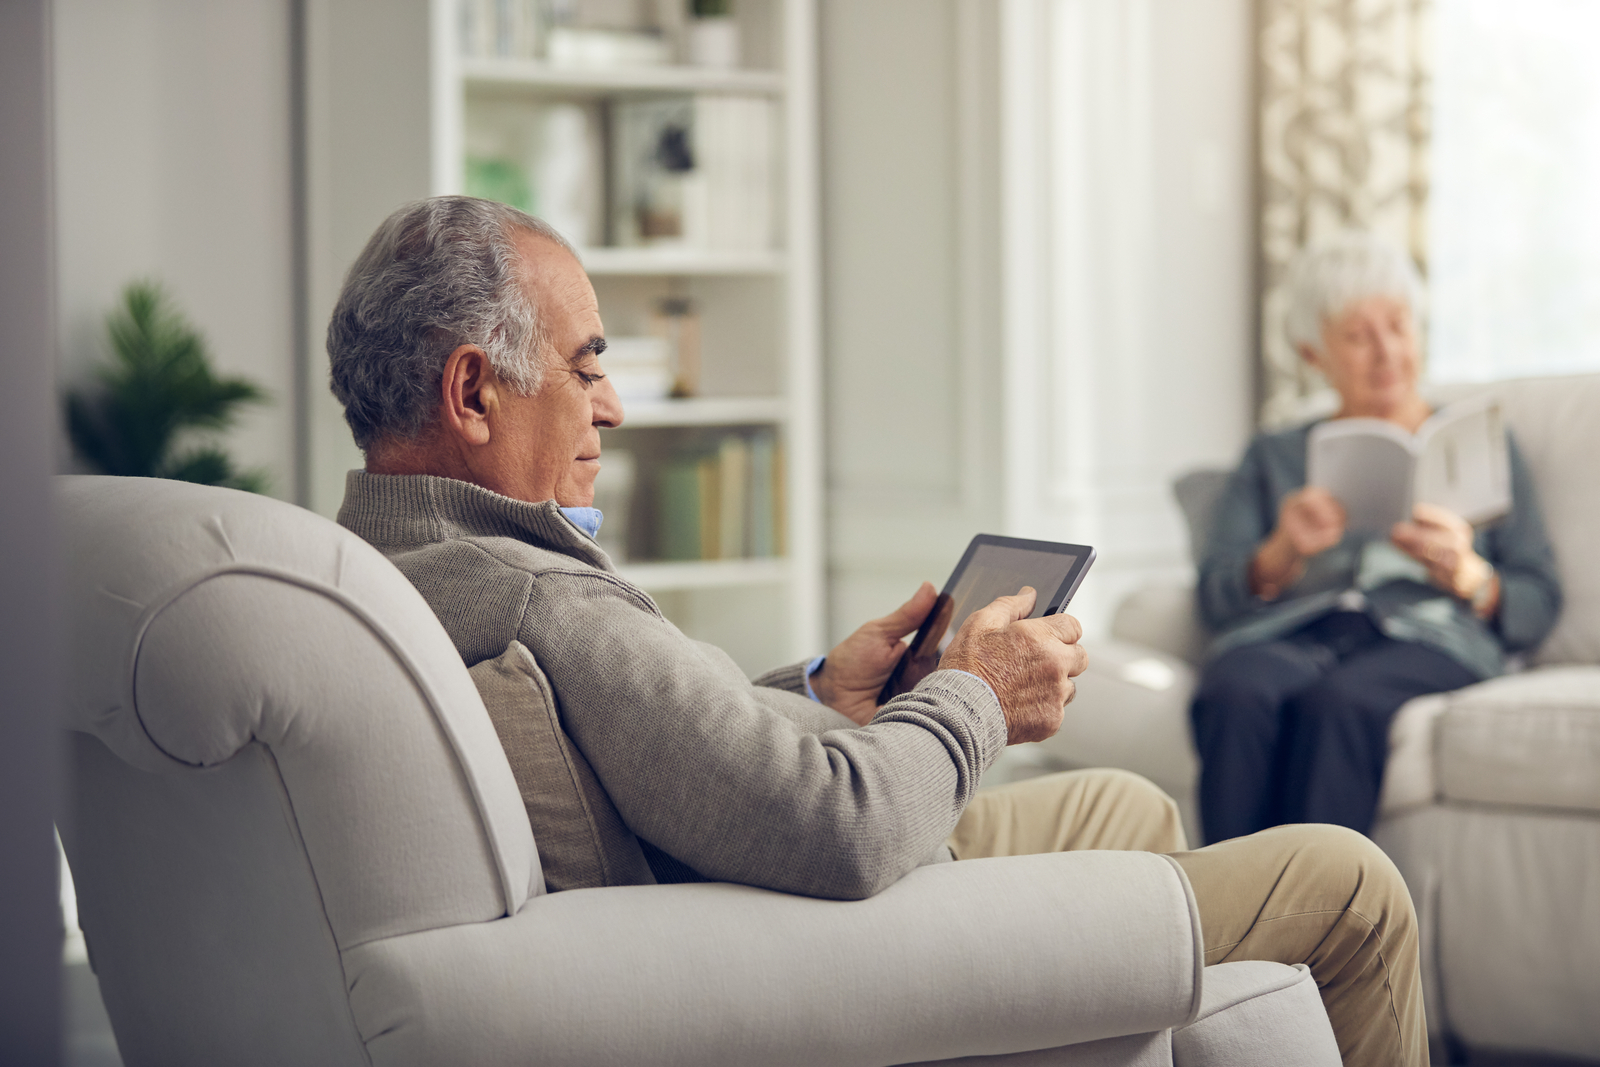 Male resident sitting in chair with iPad, across from female resident reading book on couch